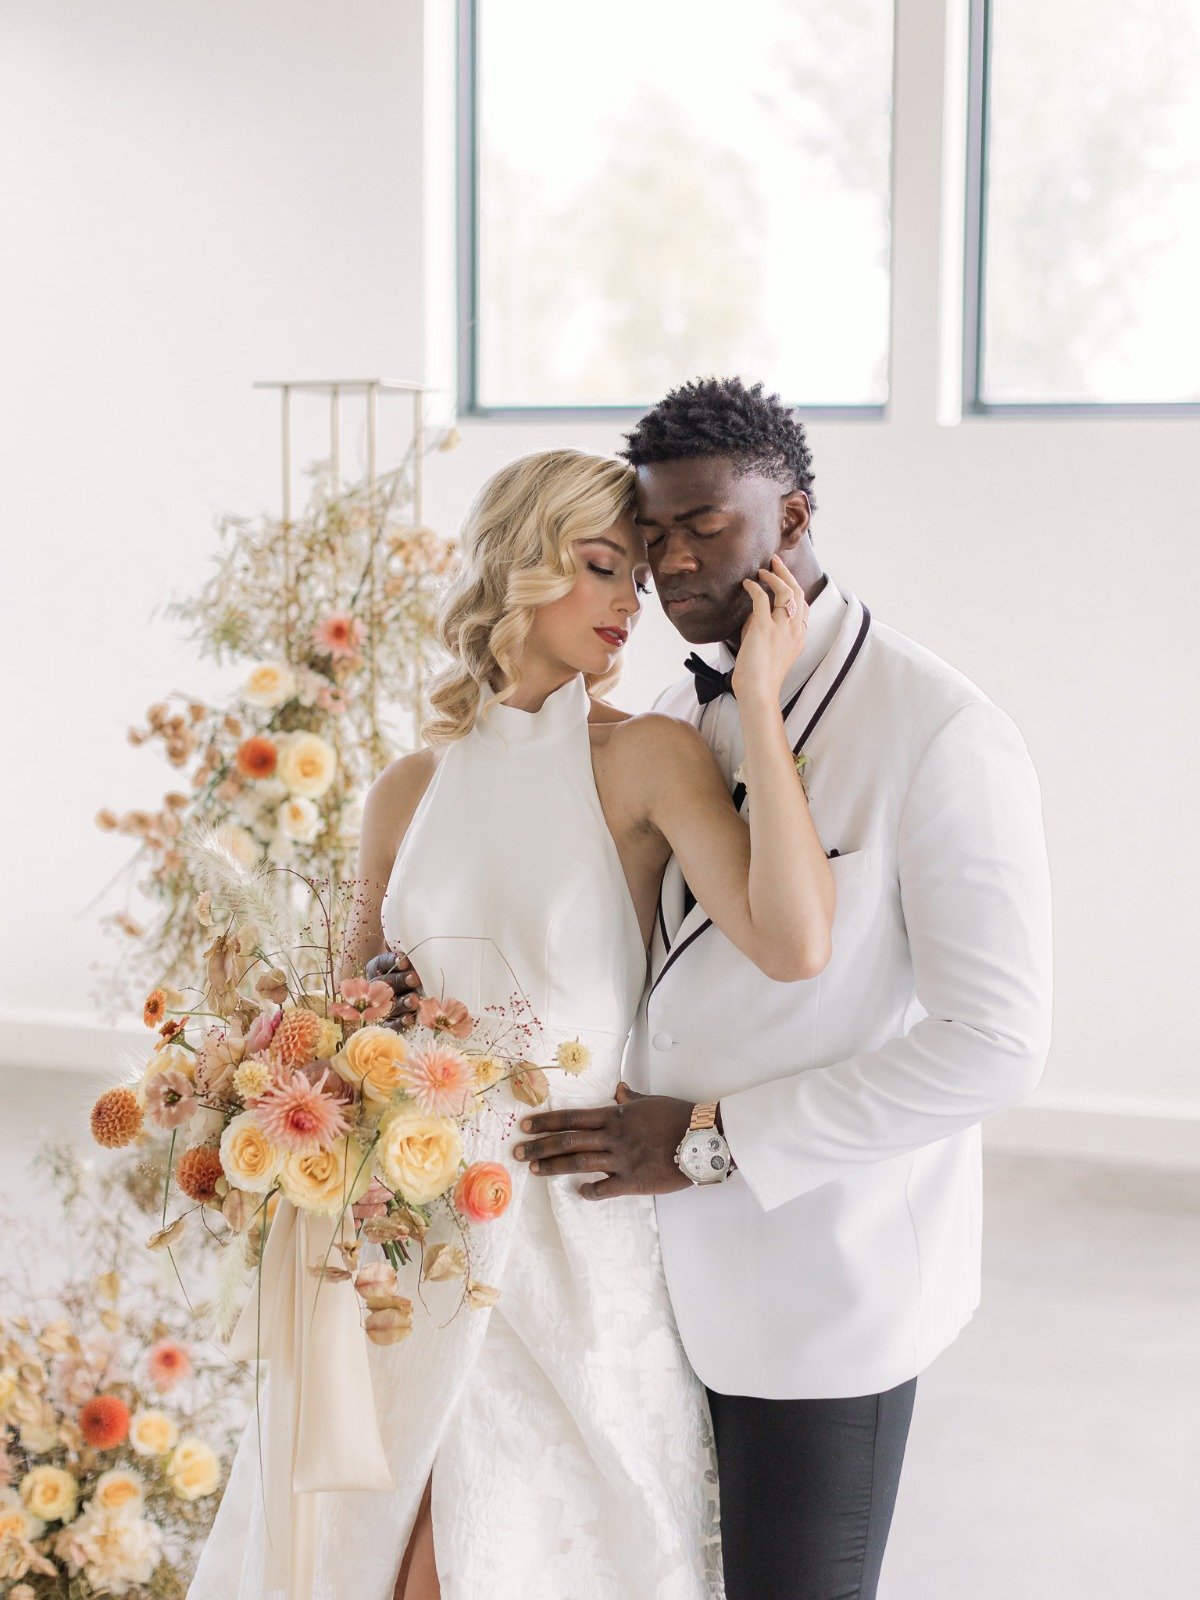 A warm, romantic, and refined fall wedding palette